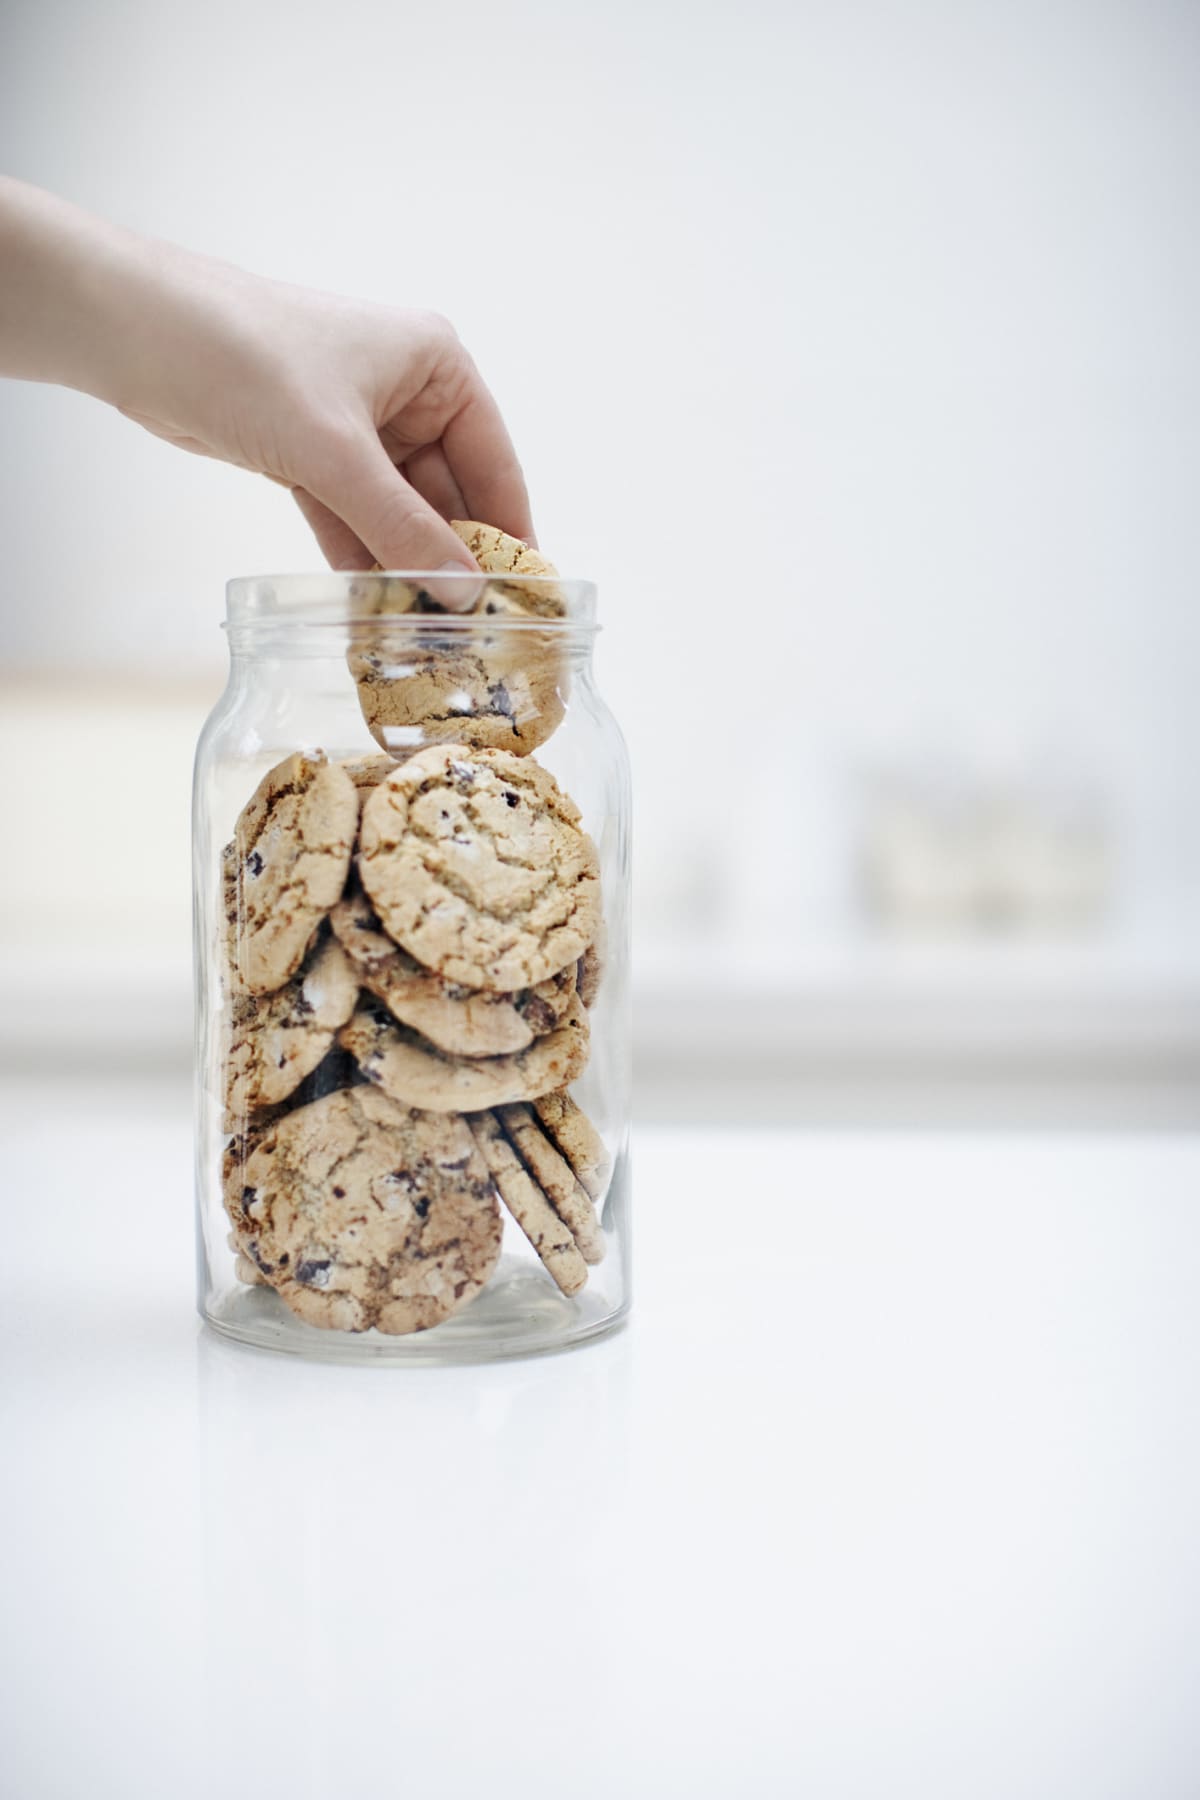 a hand taking a cookie out of a cookie jar